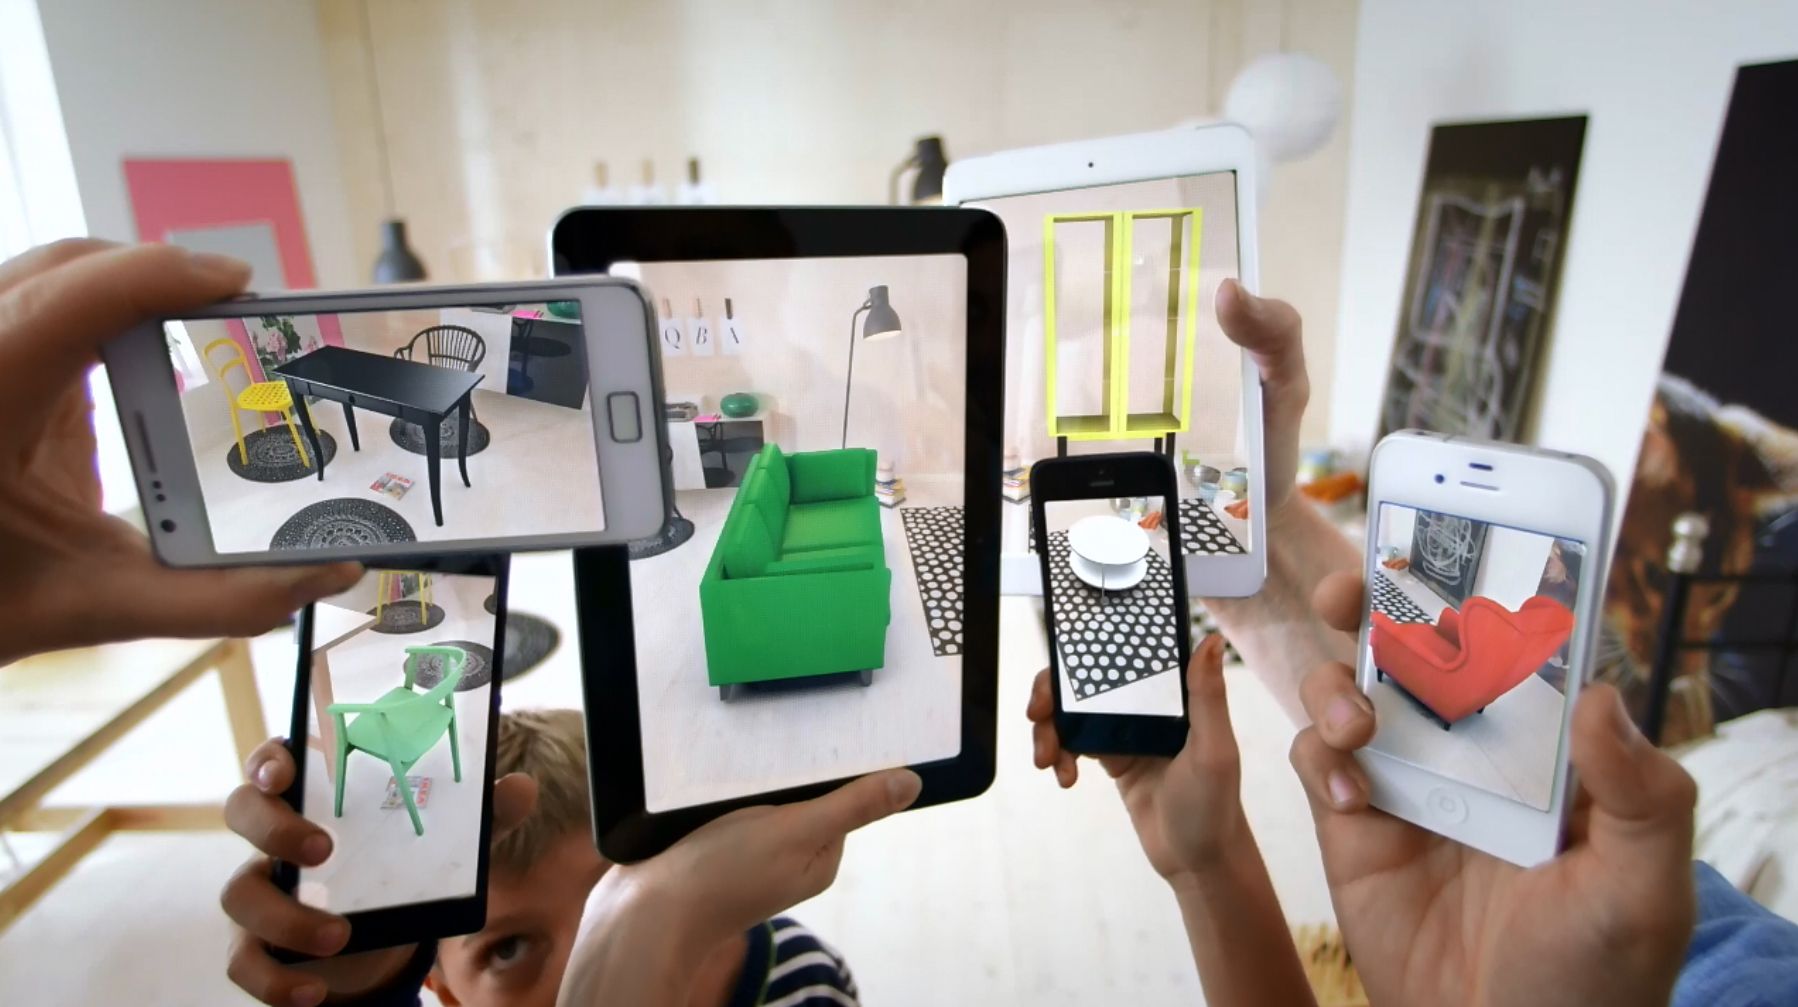 ikea will use ar within its app to help customers find the perfect furniture fit image 1